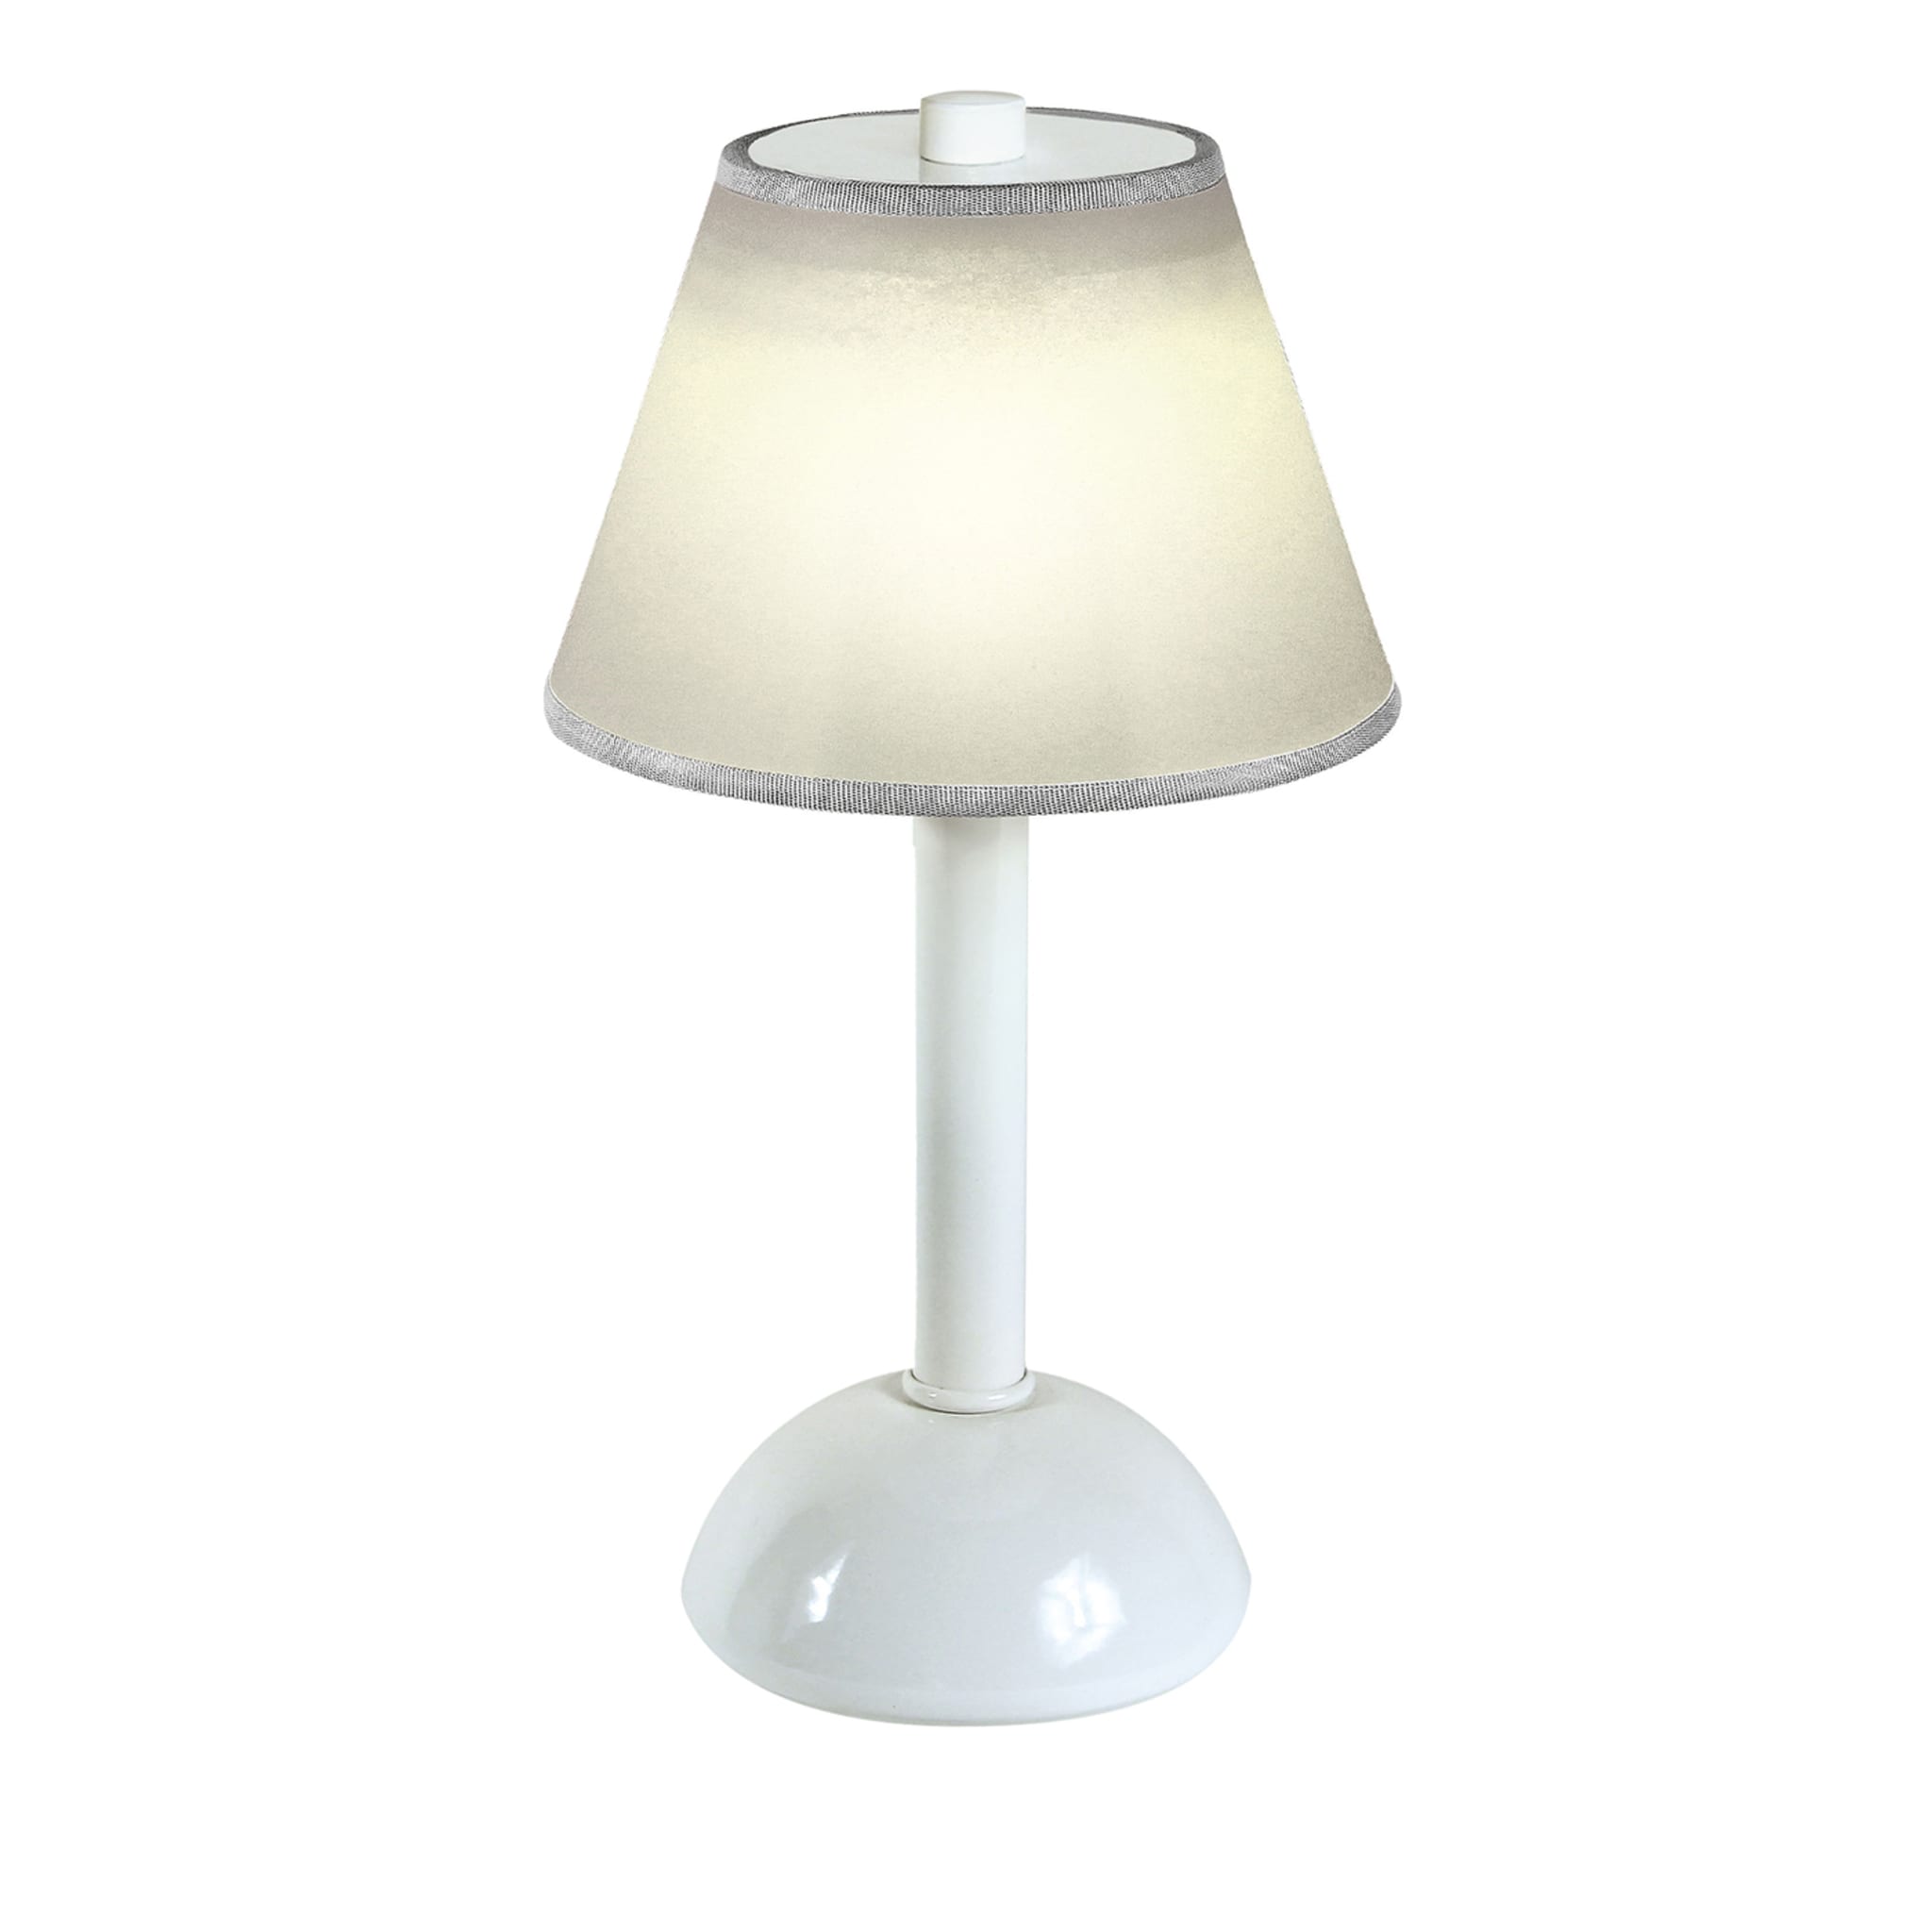 Moon Pergamena White Table Lamp by Stefano Tabarin - Main view